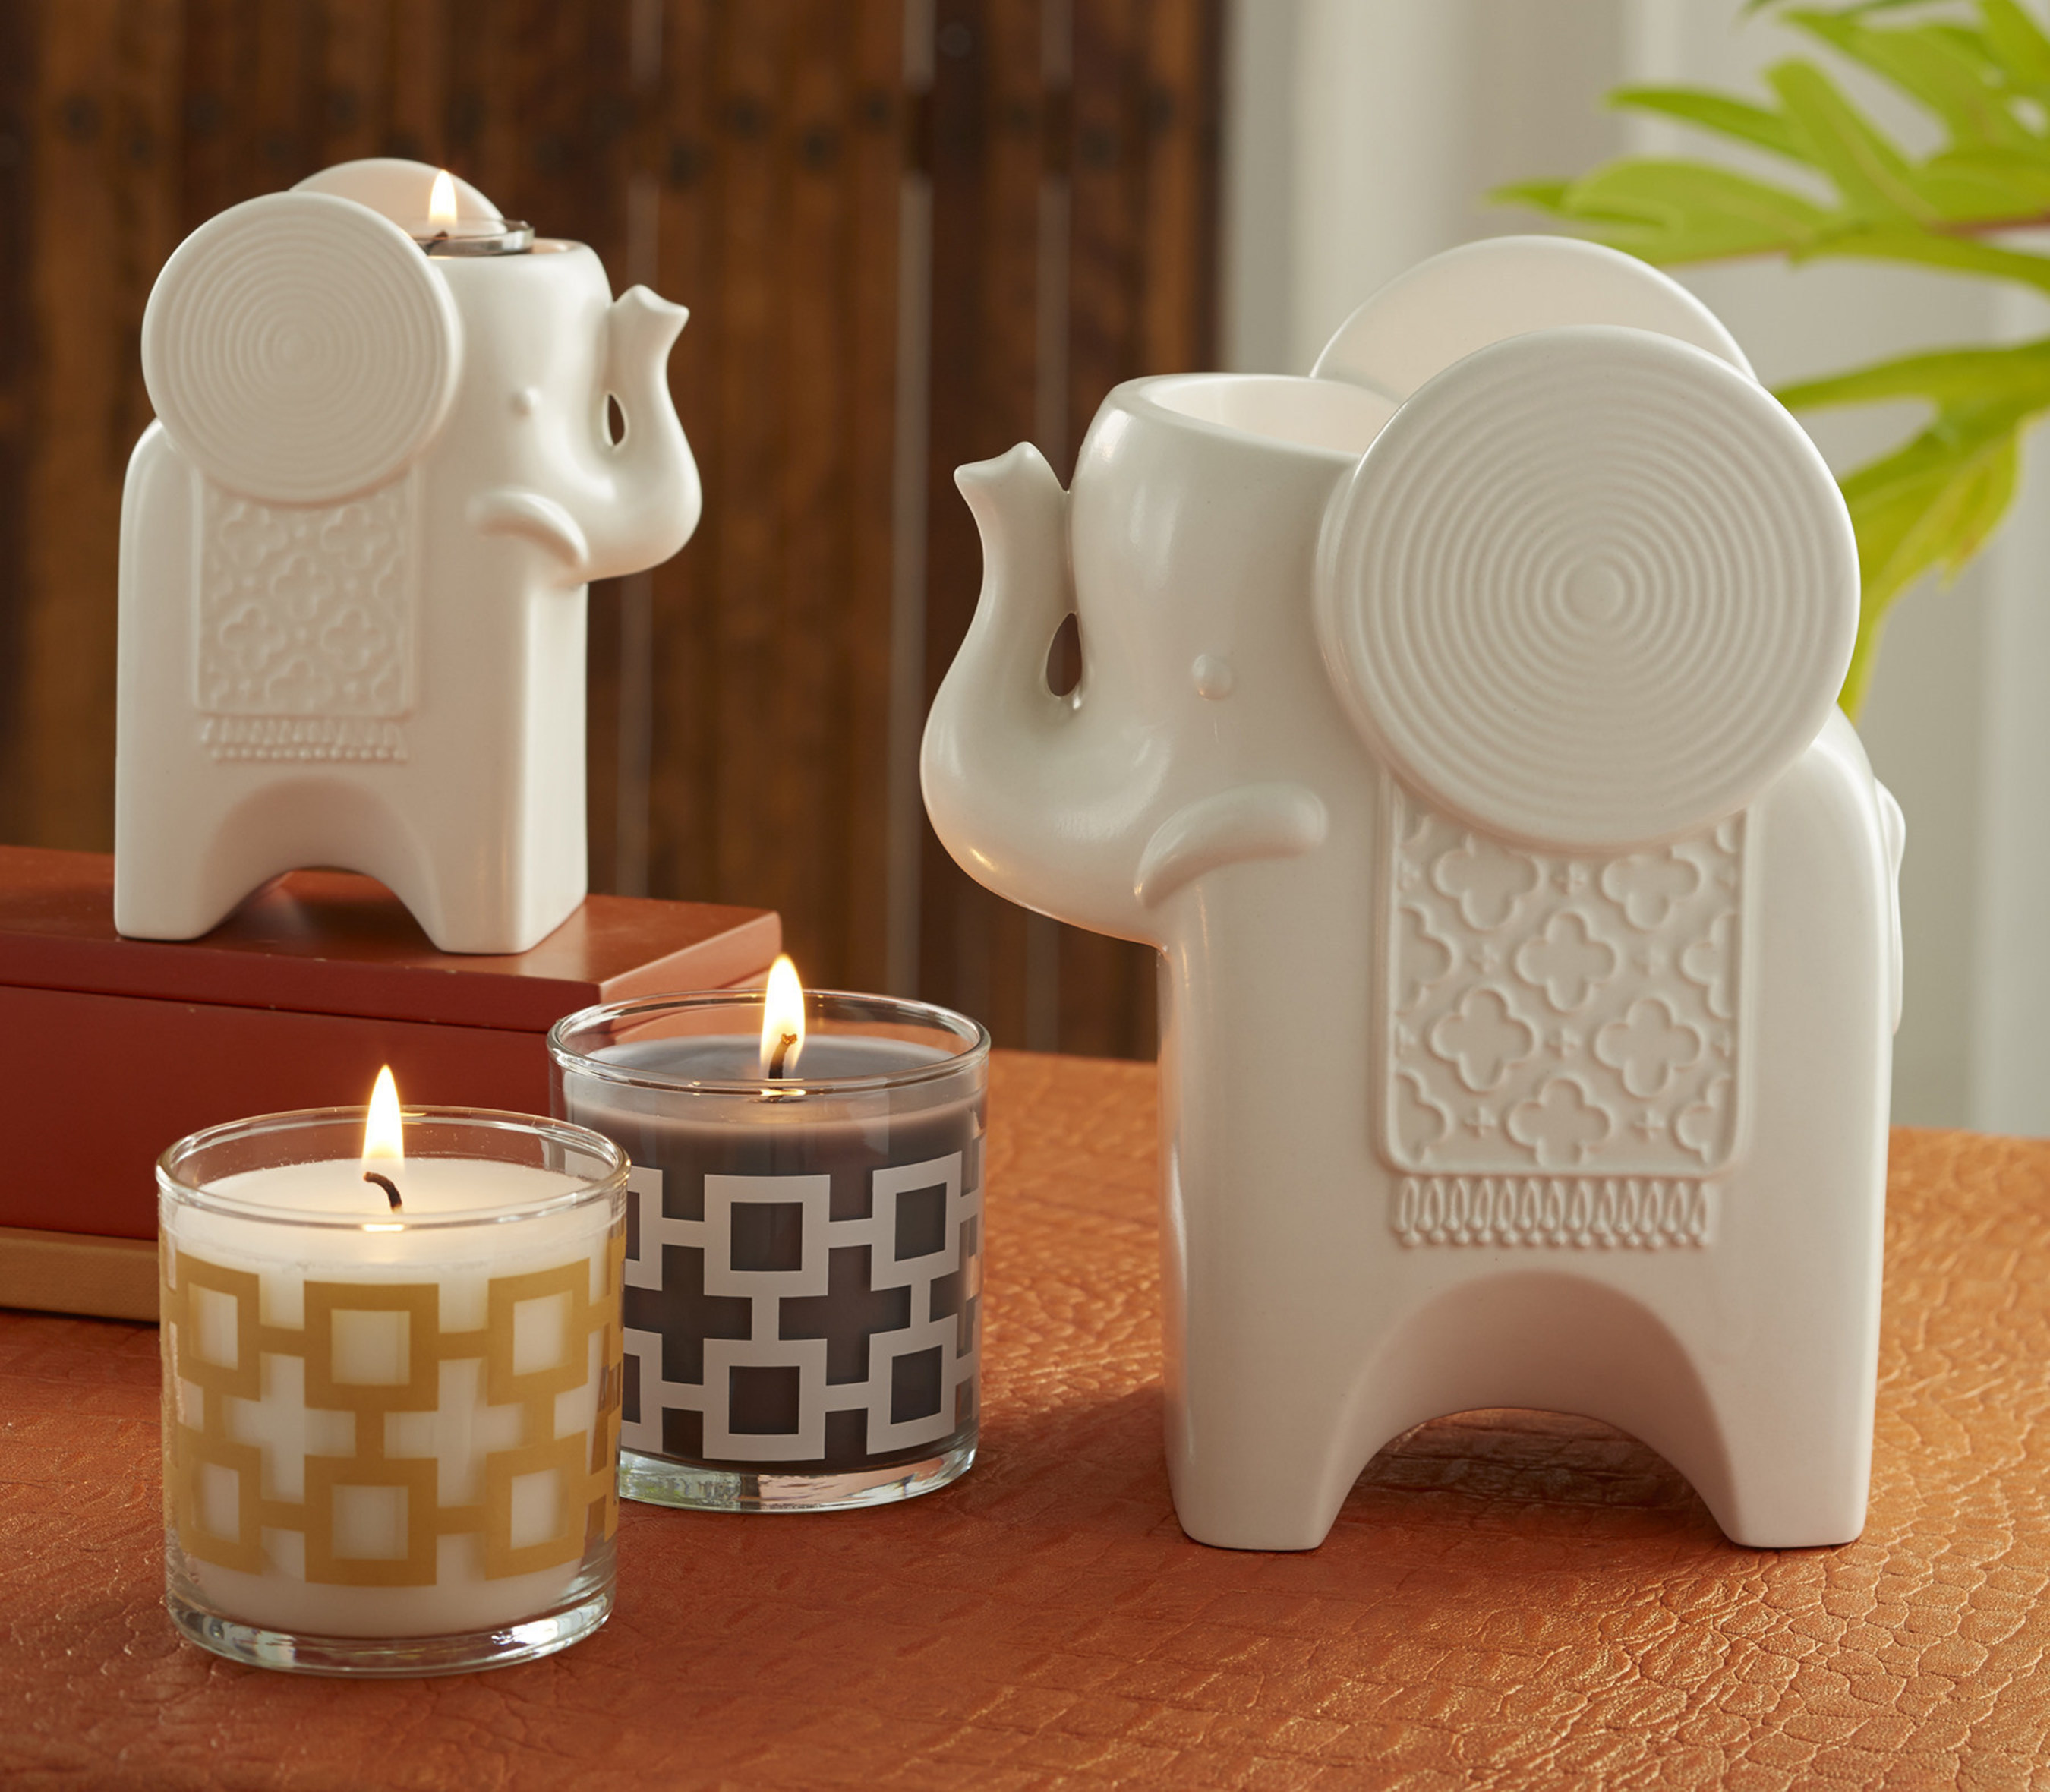 Jonathan Adler for PartyLite(R) Safari Chic collection to be featured at the November 21, 2014 Humane Society of the U.S. 60th Anniversary Gala